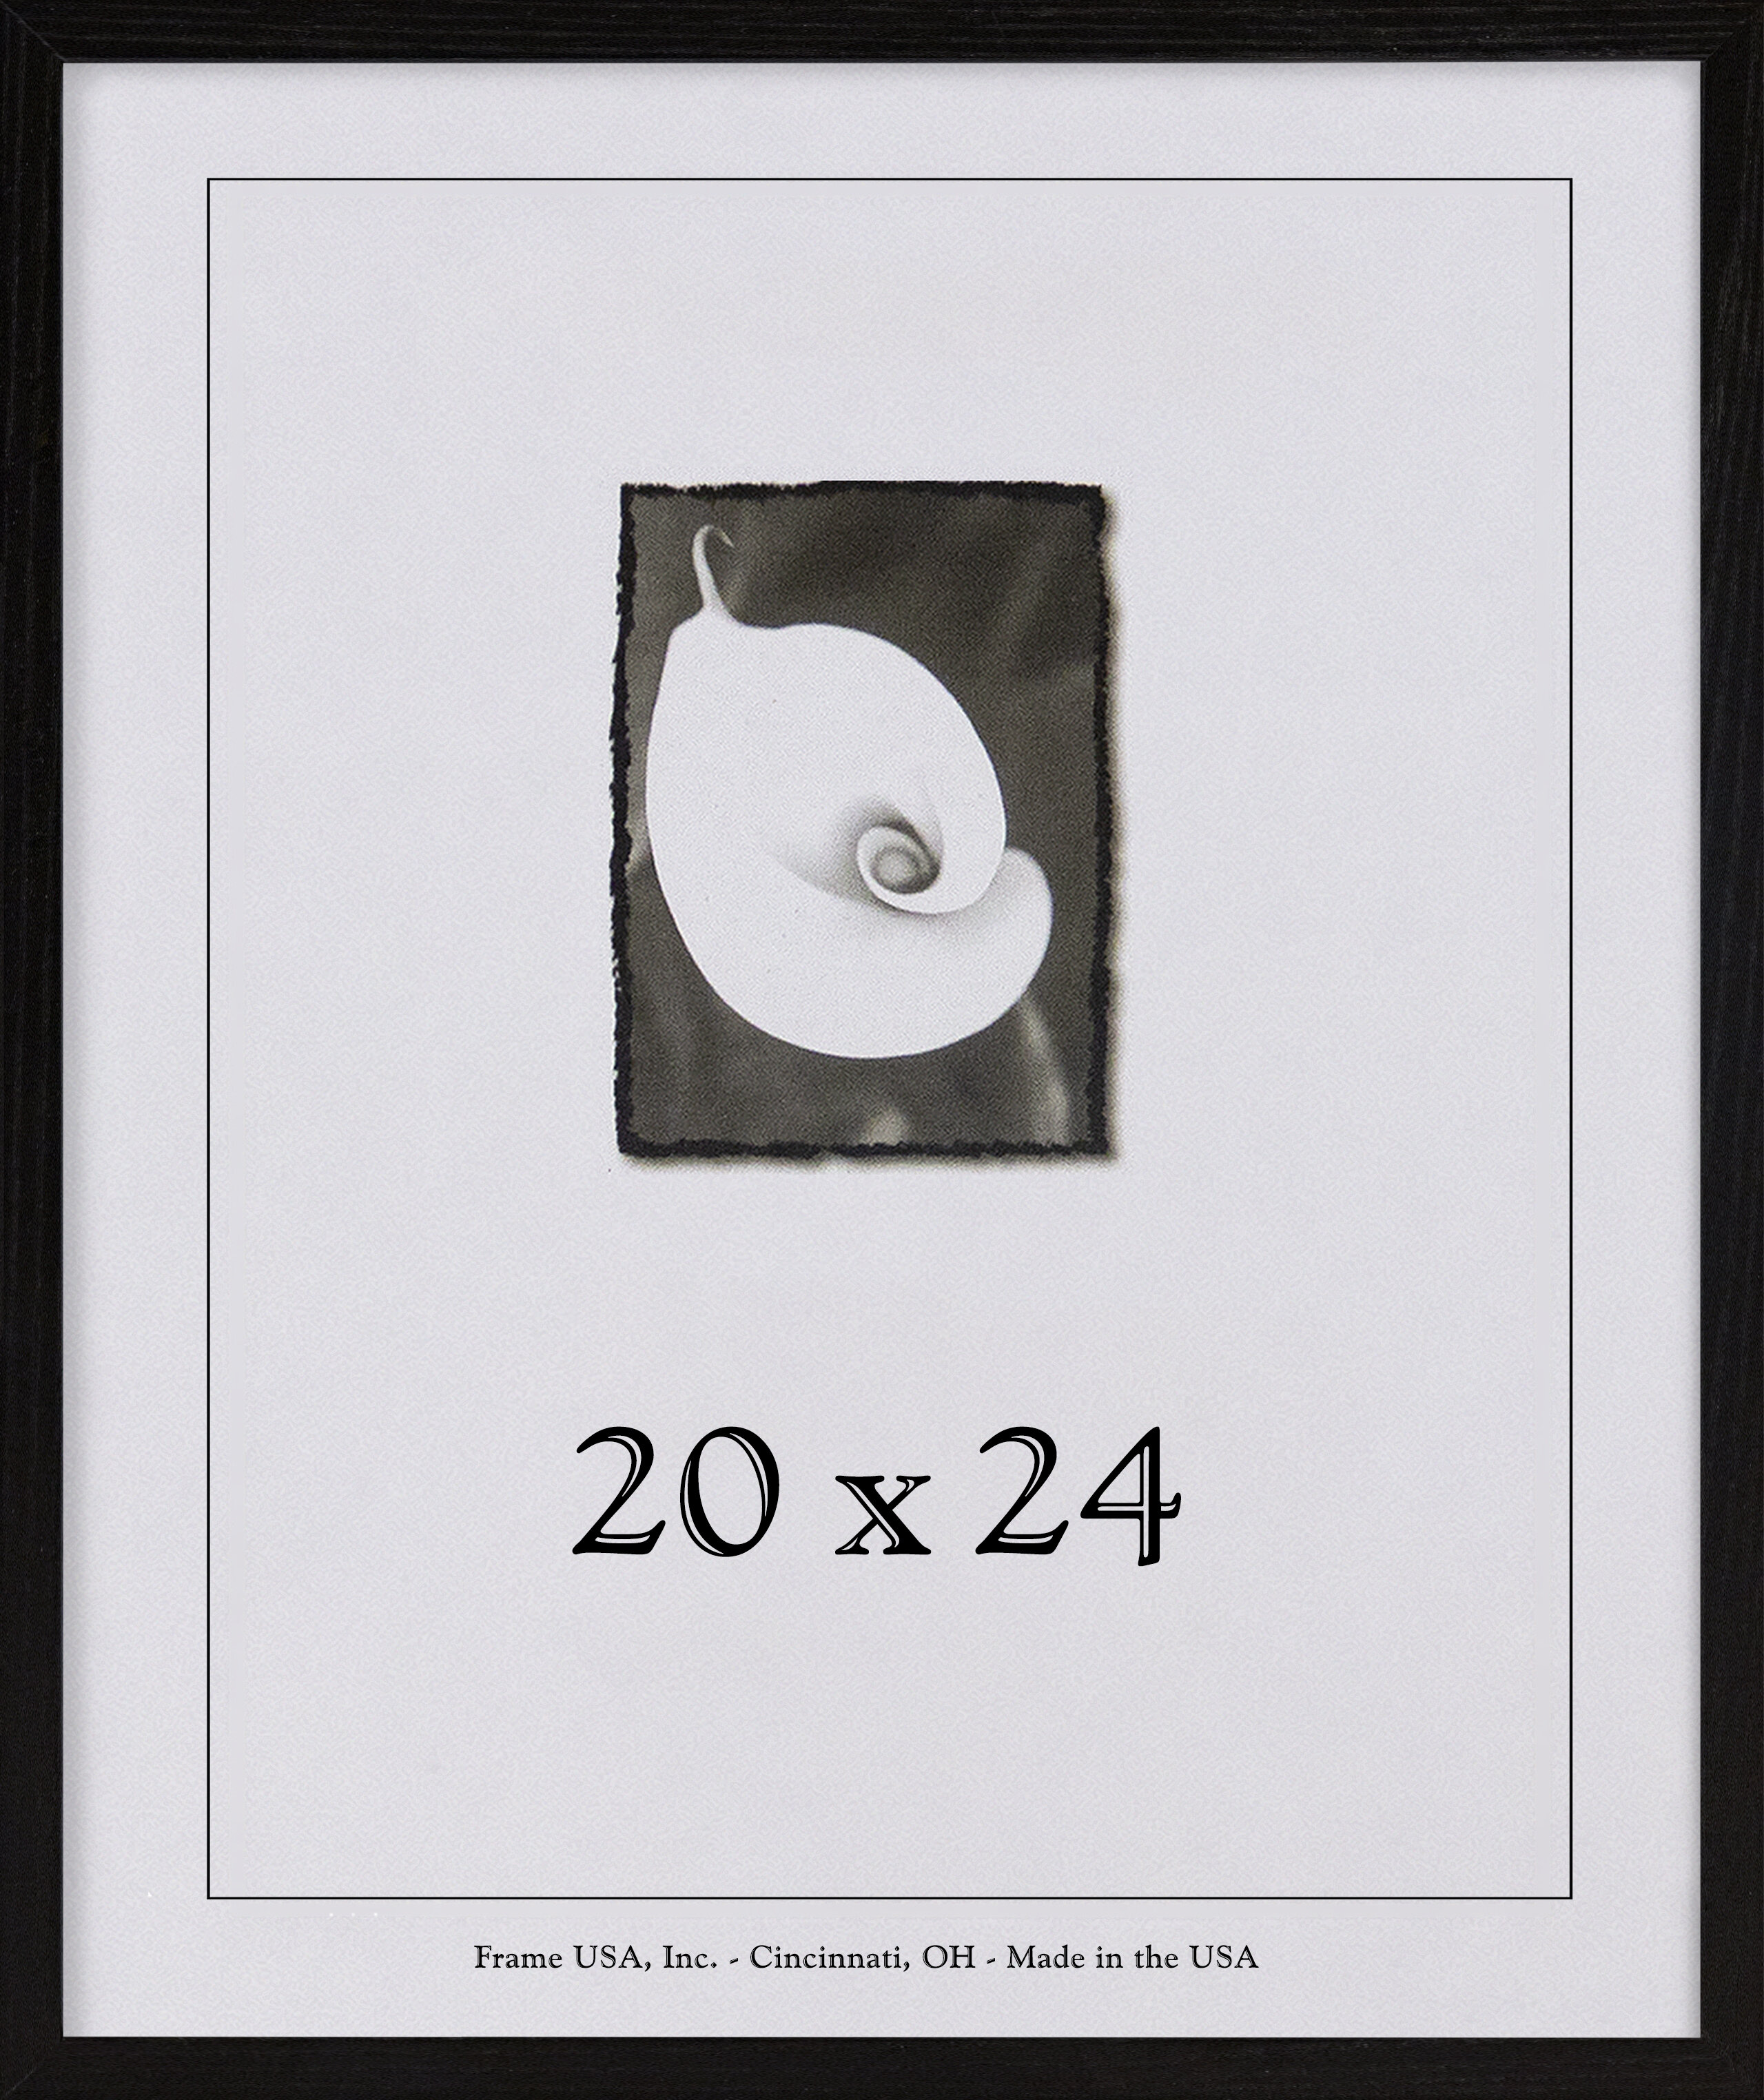 Item Height: 8 x 10 Black and Silver Composite Picture Frame 2 1/4 Wide 